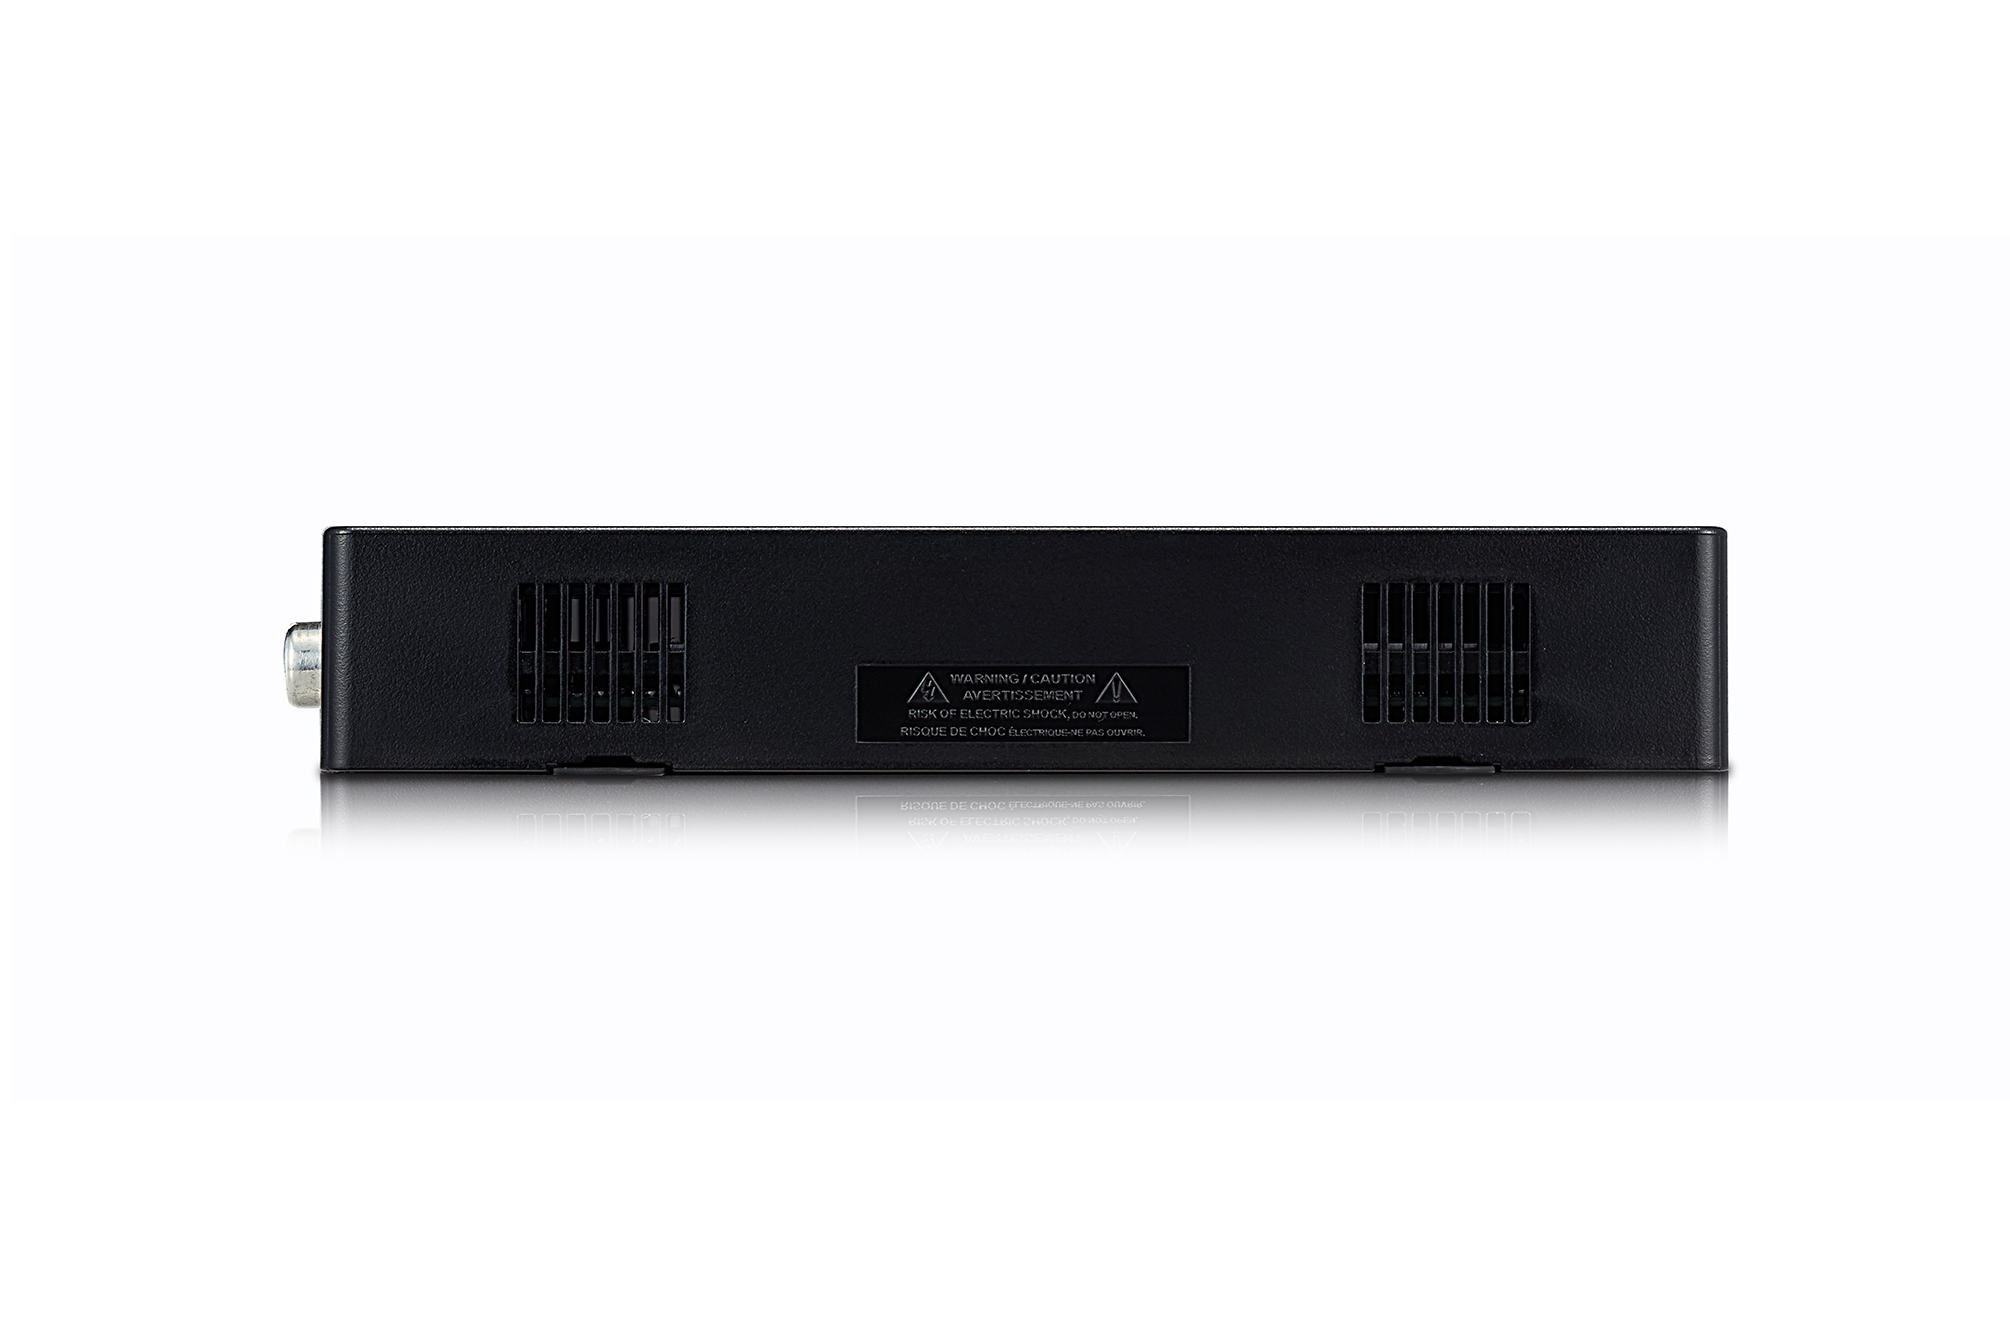 Commercial TV STB-6500 (MEA), -90 degree side view